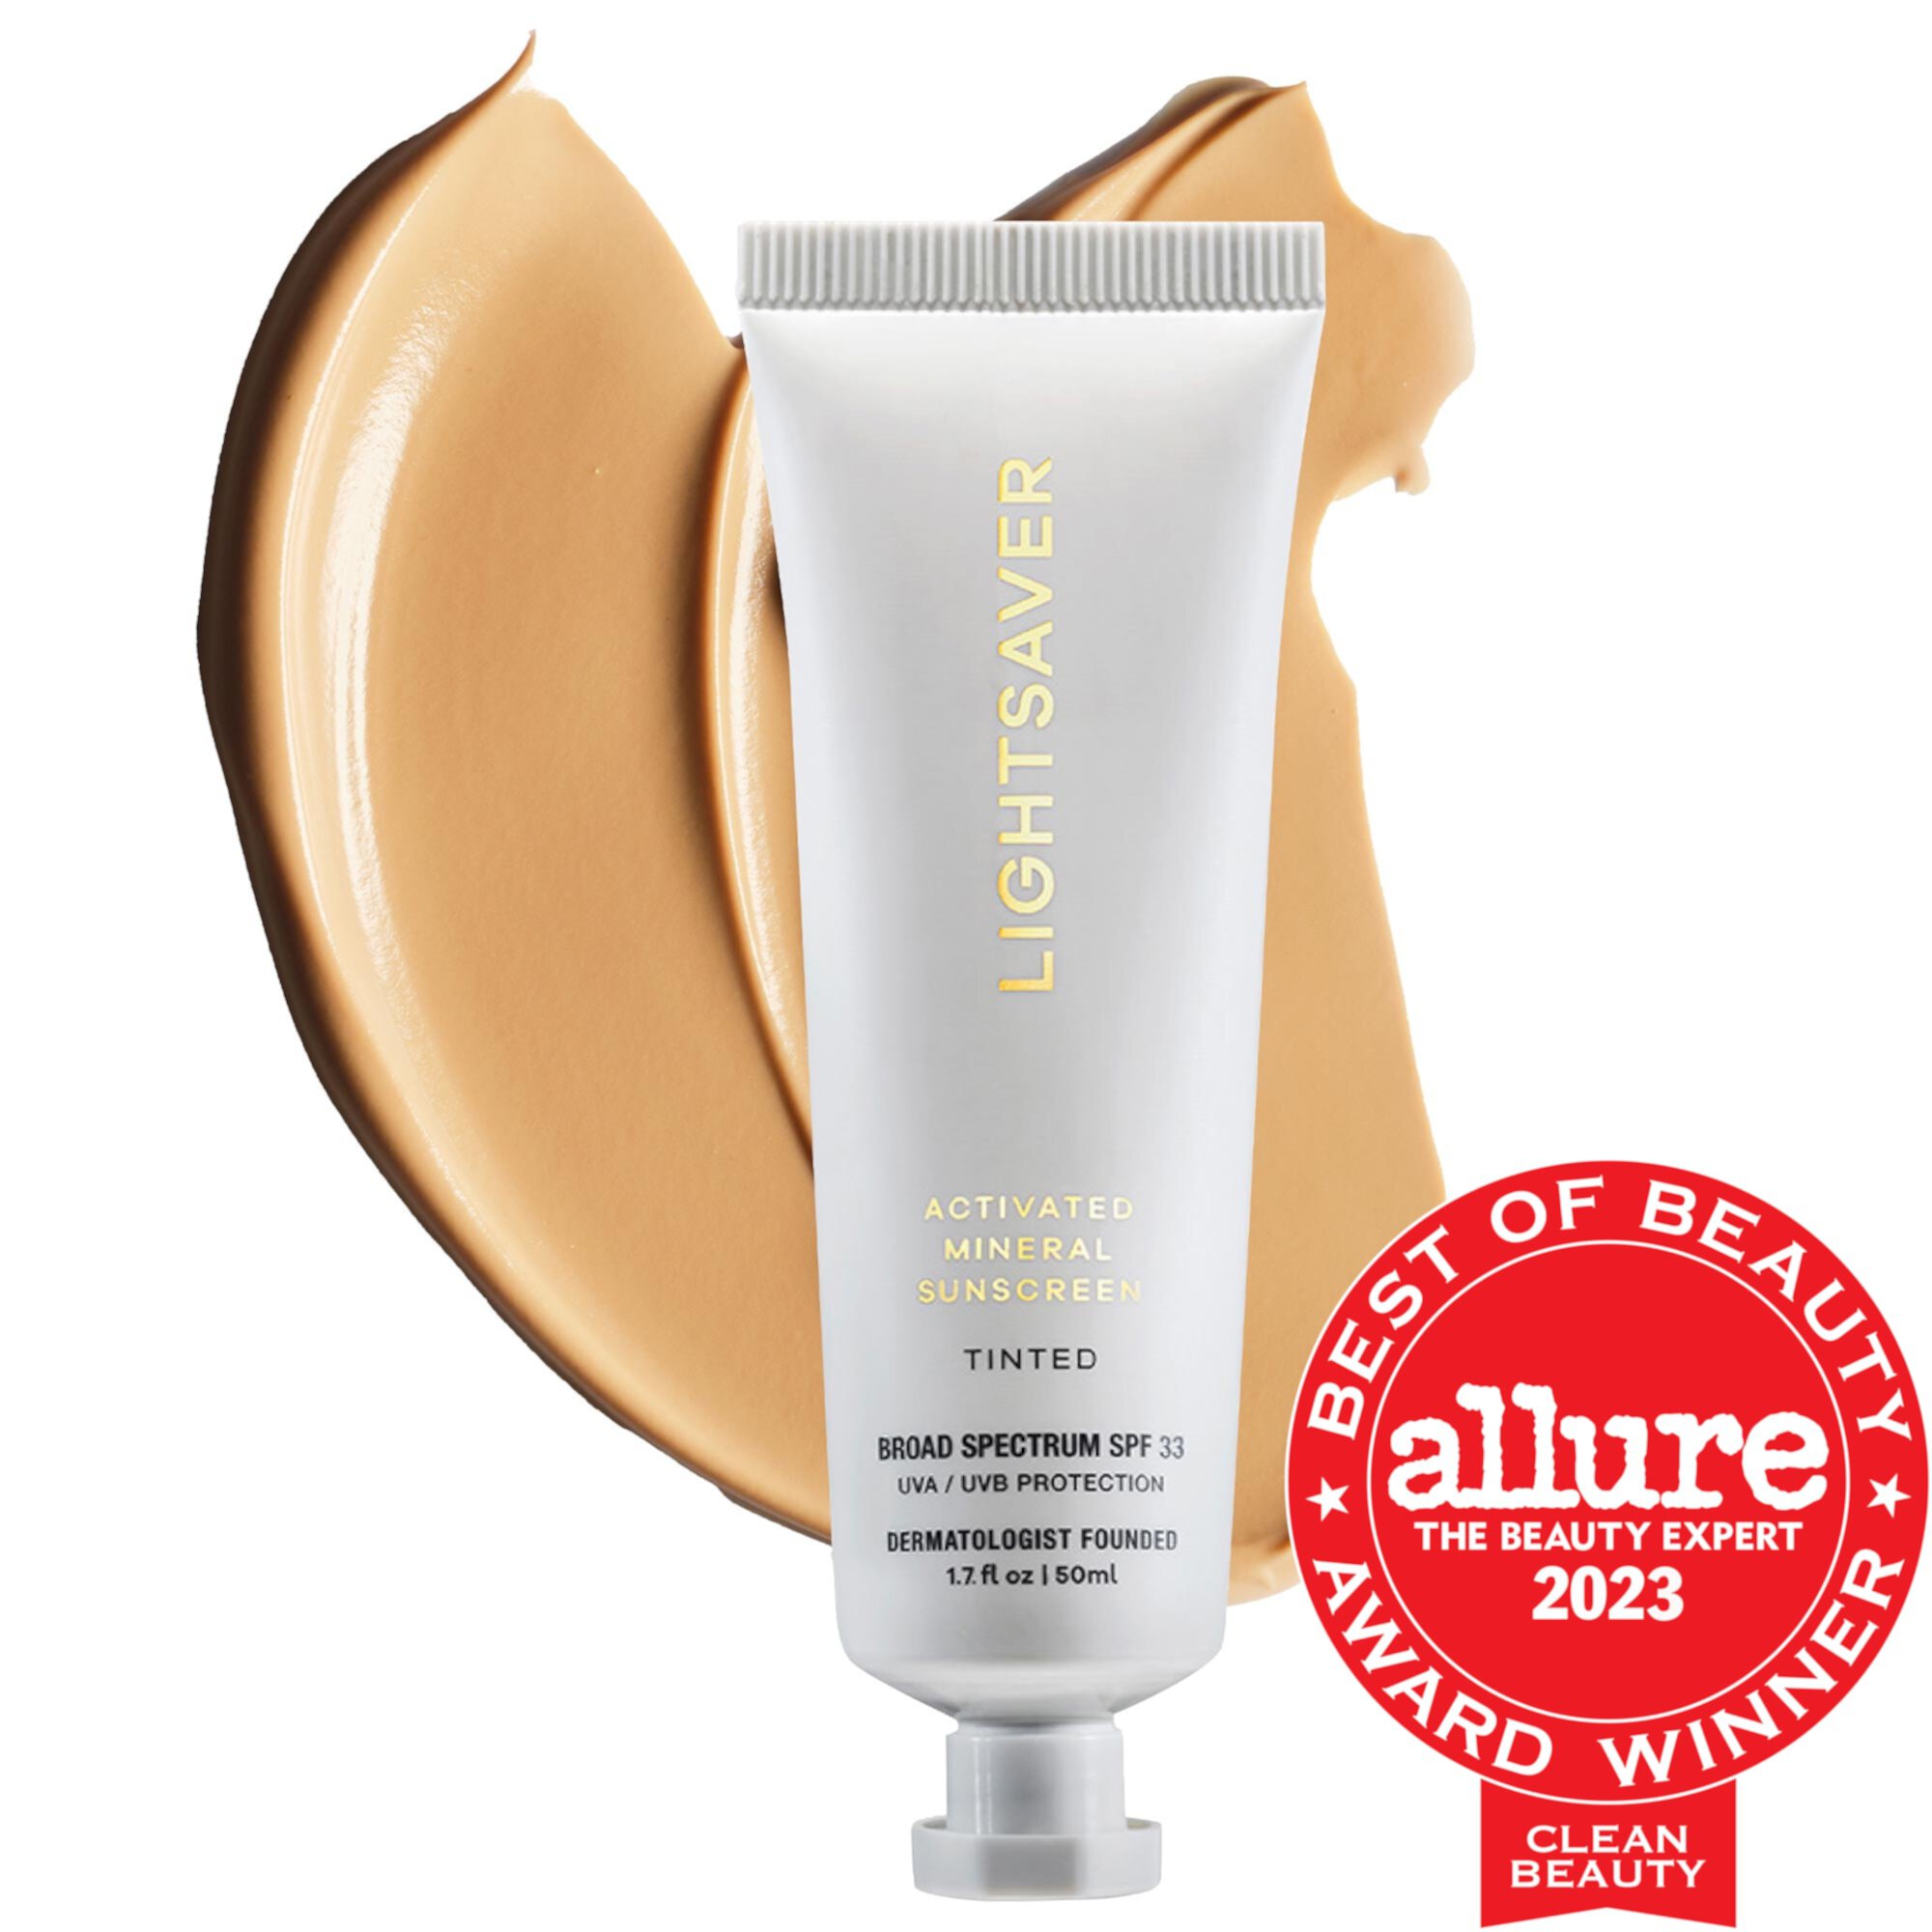 Tinted - Activated Mineral Face Sunscreen Broad Spectrum - SPF 33 LIGHTSAVER